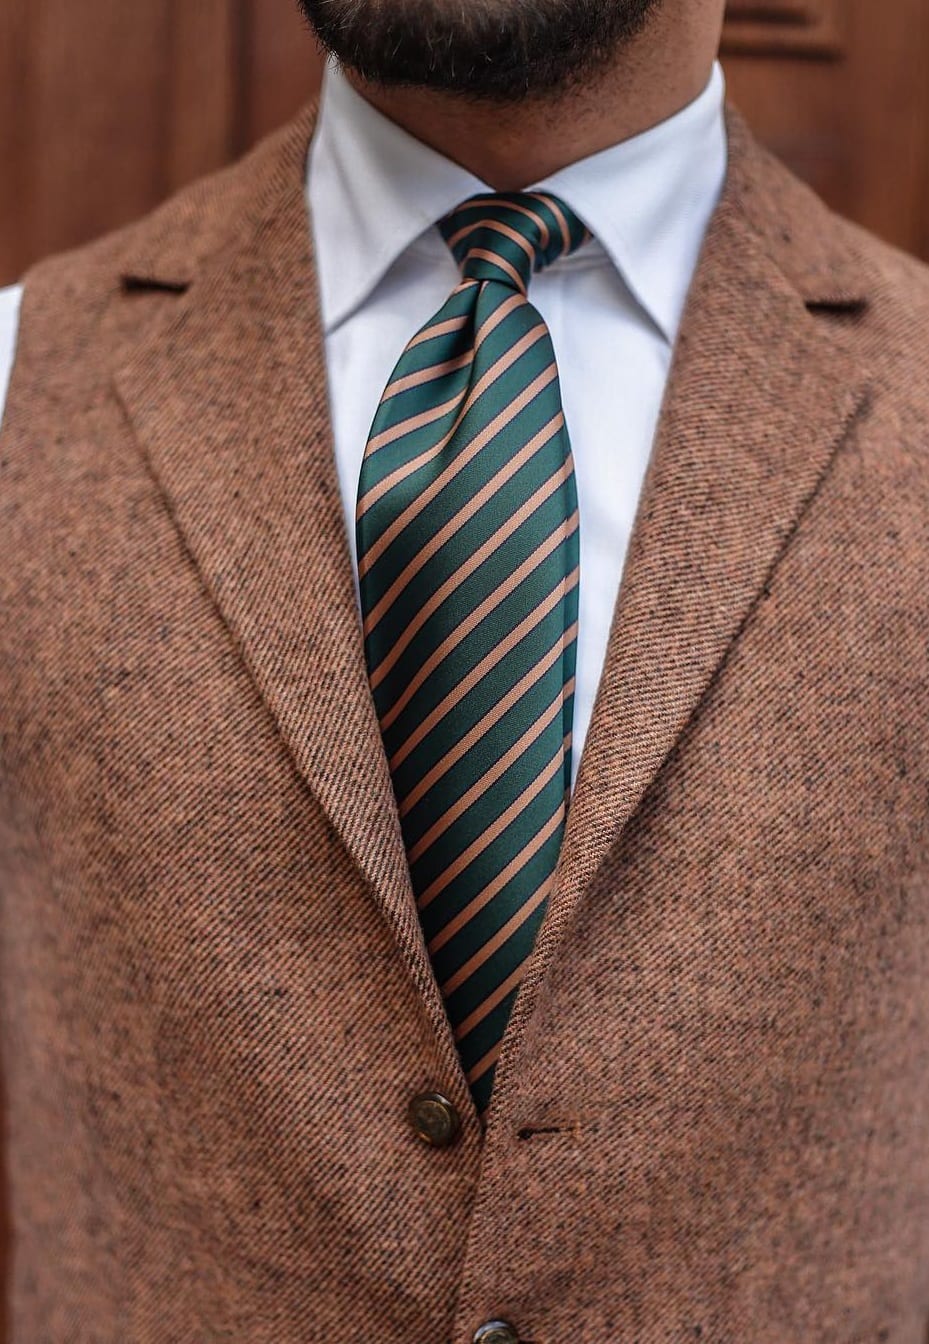 Tie- Accessory to add in your work wardrobe